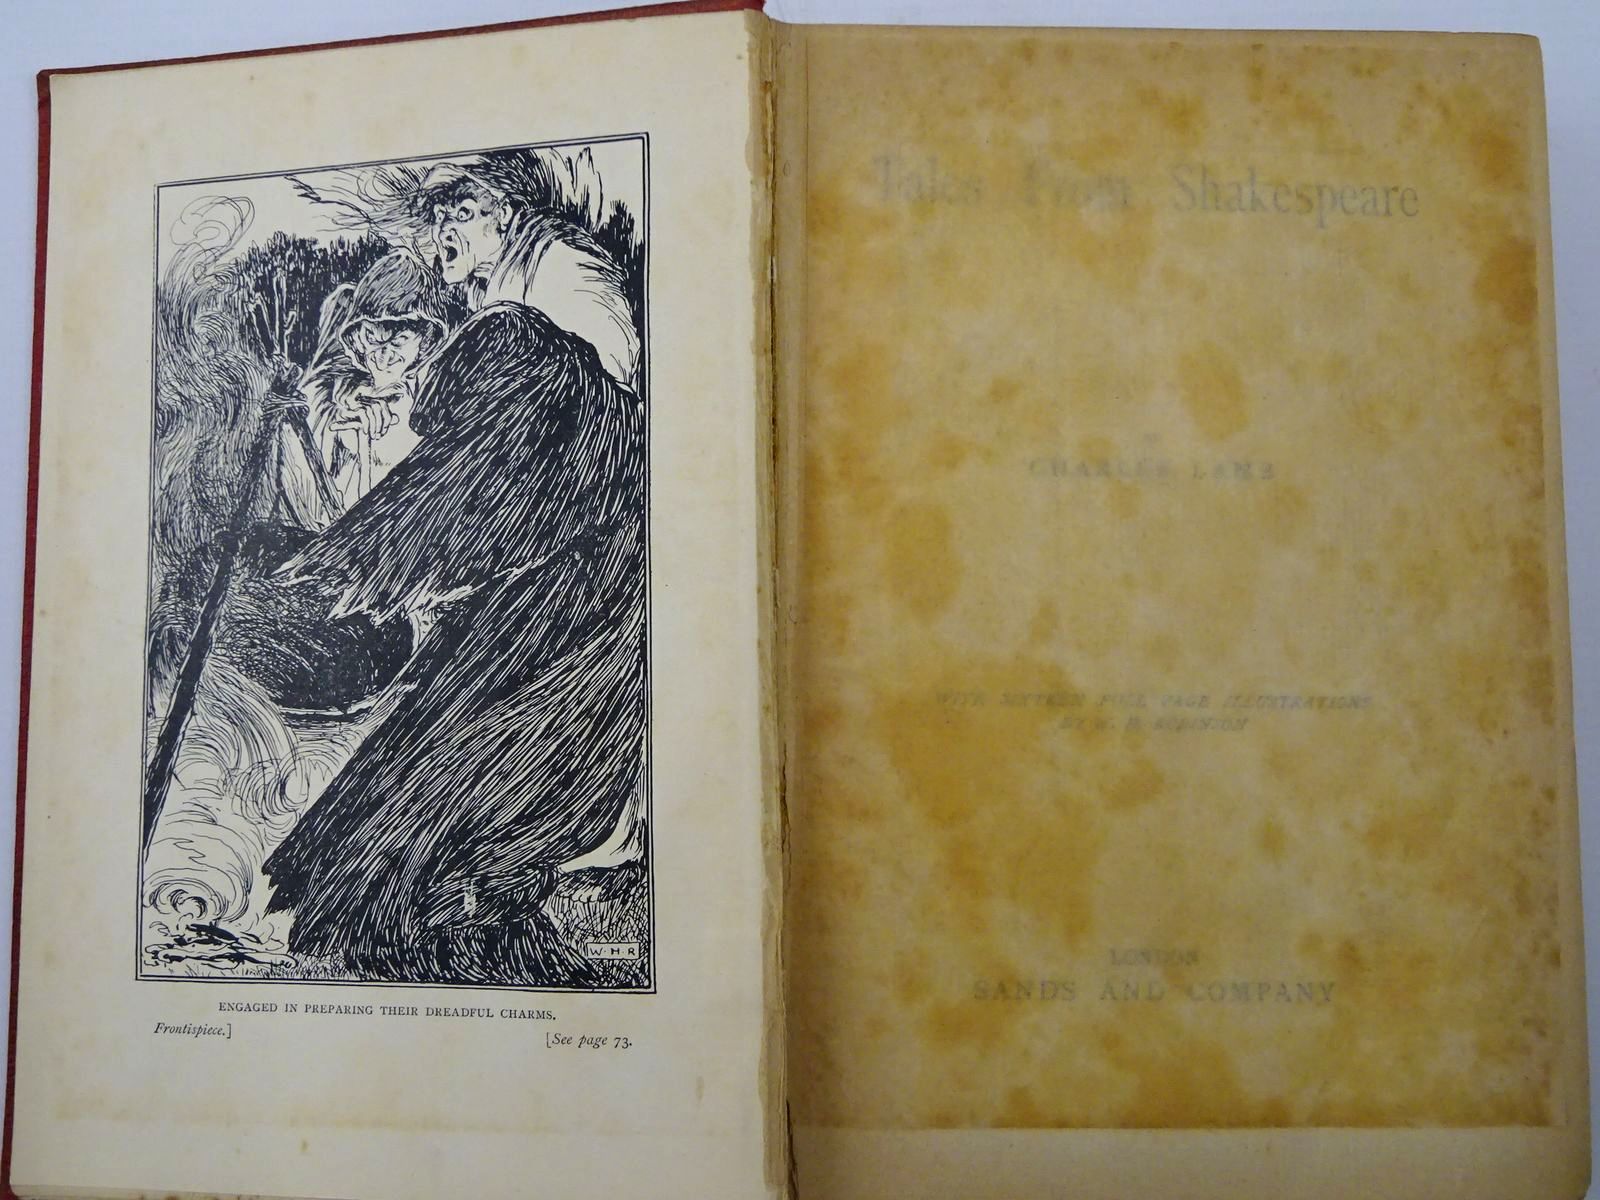 Photo of TALES FROM SHAKESPEARE written by Lamb, Charles
Shakespeare, William illustrated by Robinson, W. Heath published by Sands & Co. (STOCK CODE: 2129855)  for sale by Stella & Rose's Books